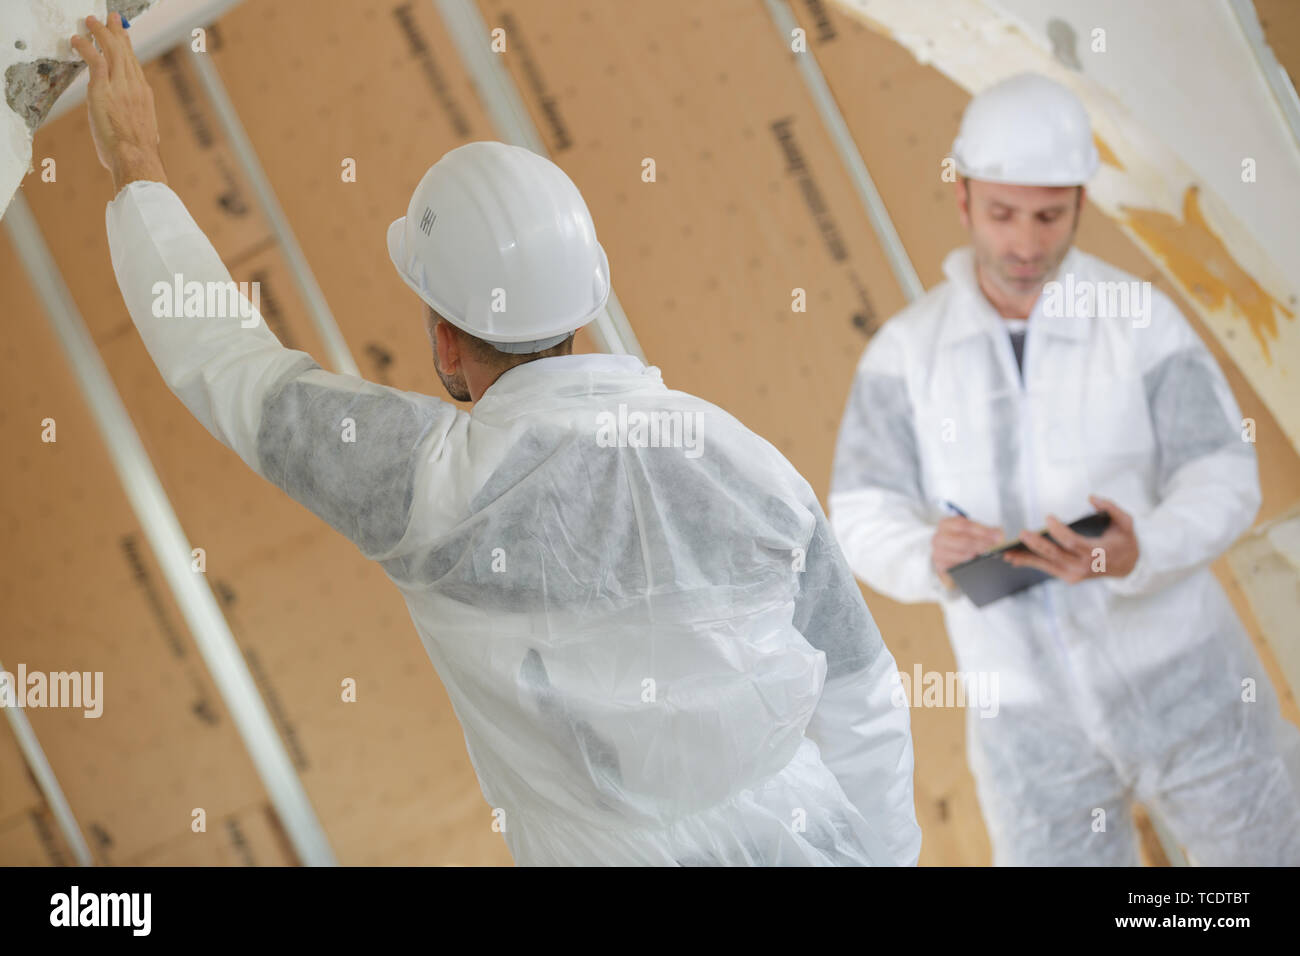 workers plastering a wall using trowel Stock Photo